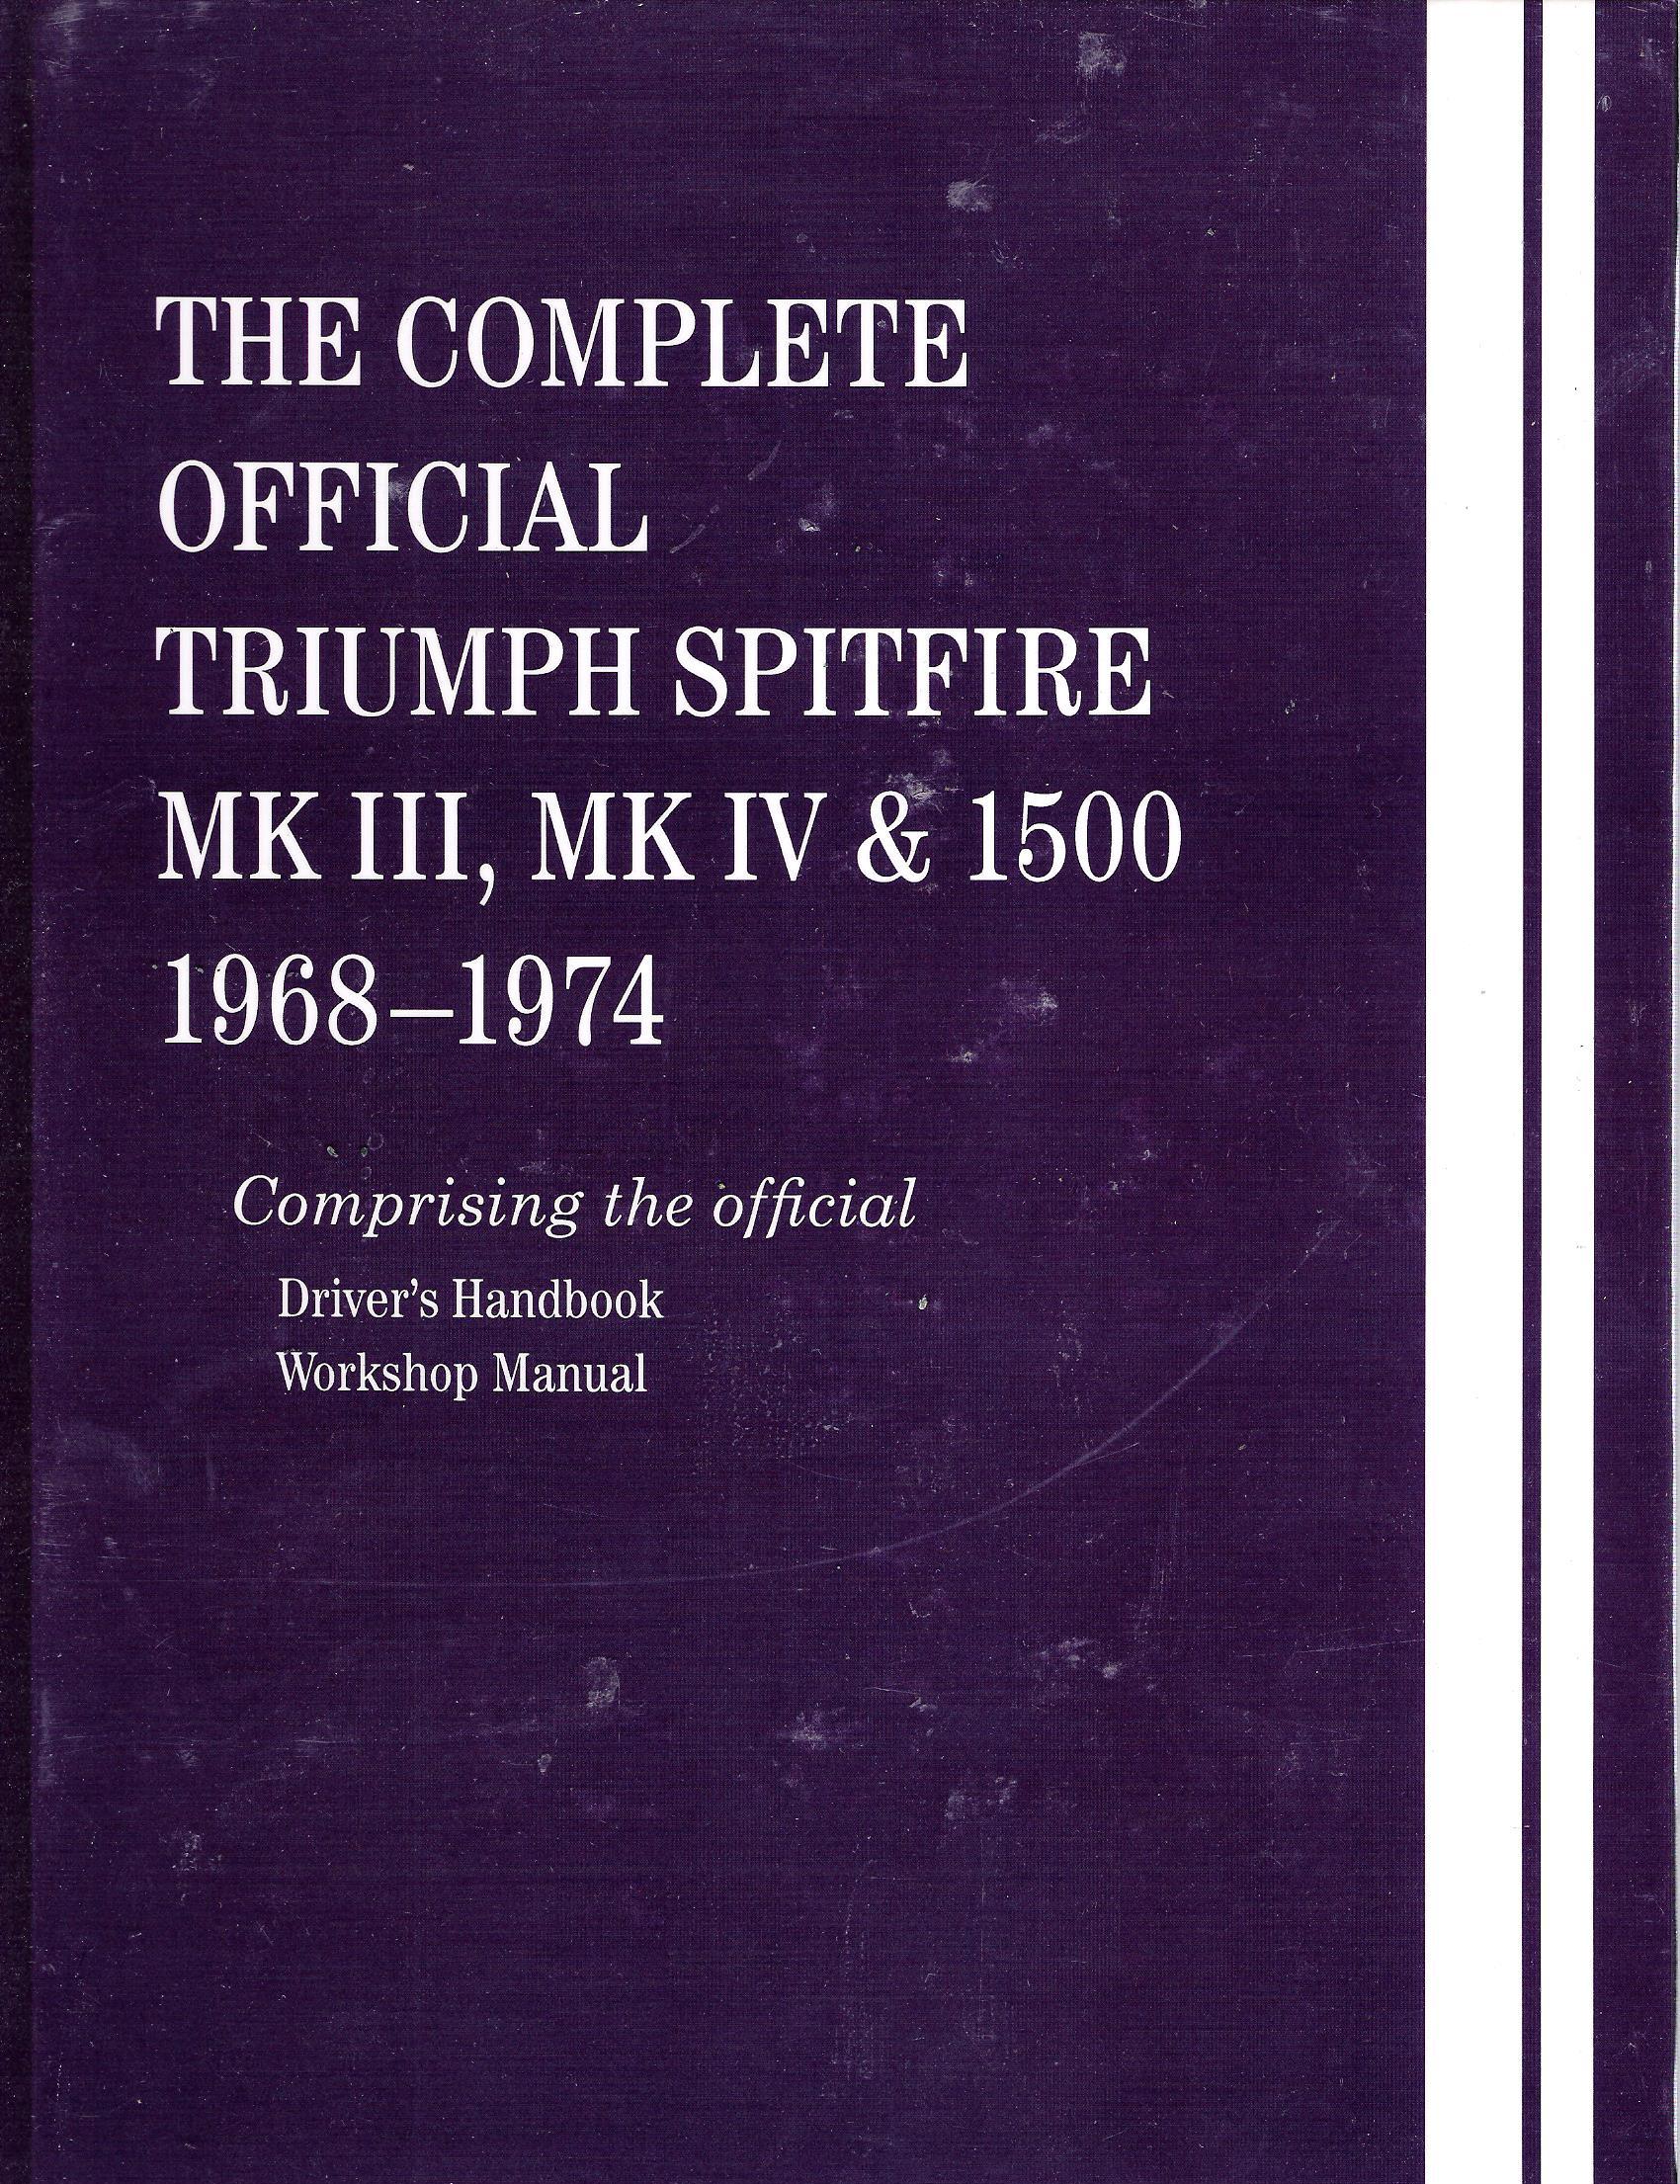 1968-1974 The Complete Official Triumph Spitfire, MK III, MKIV, 1500, Bentley Factory Service Manual